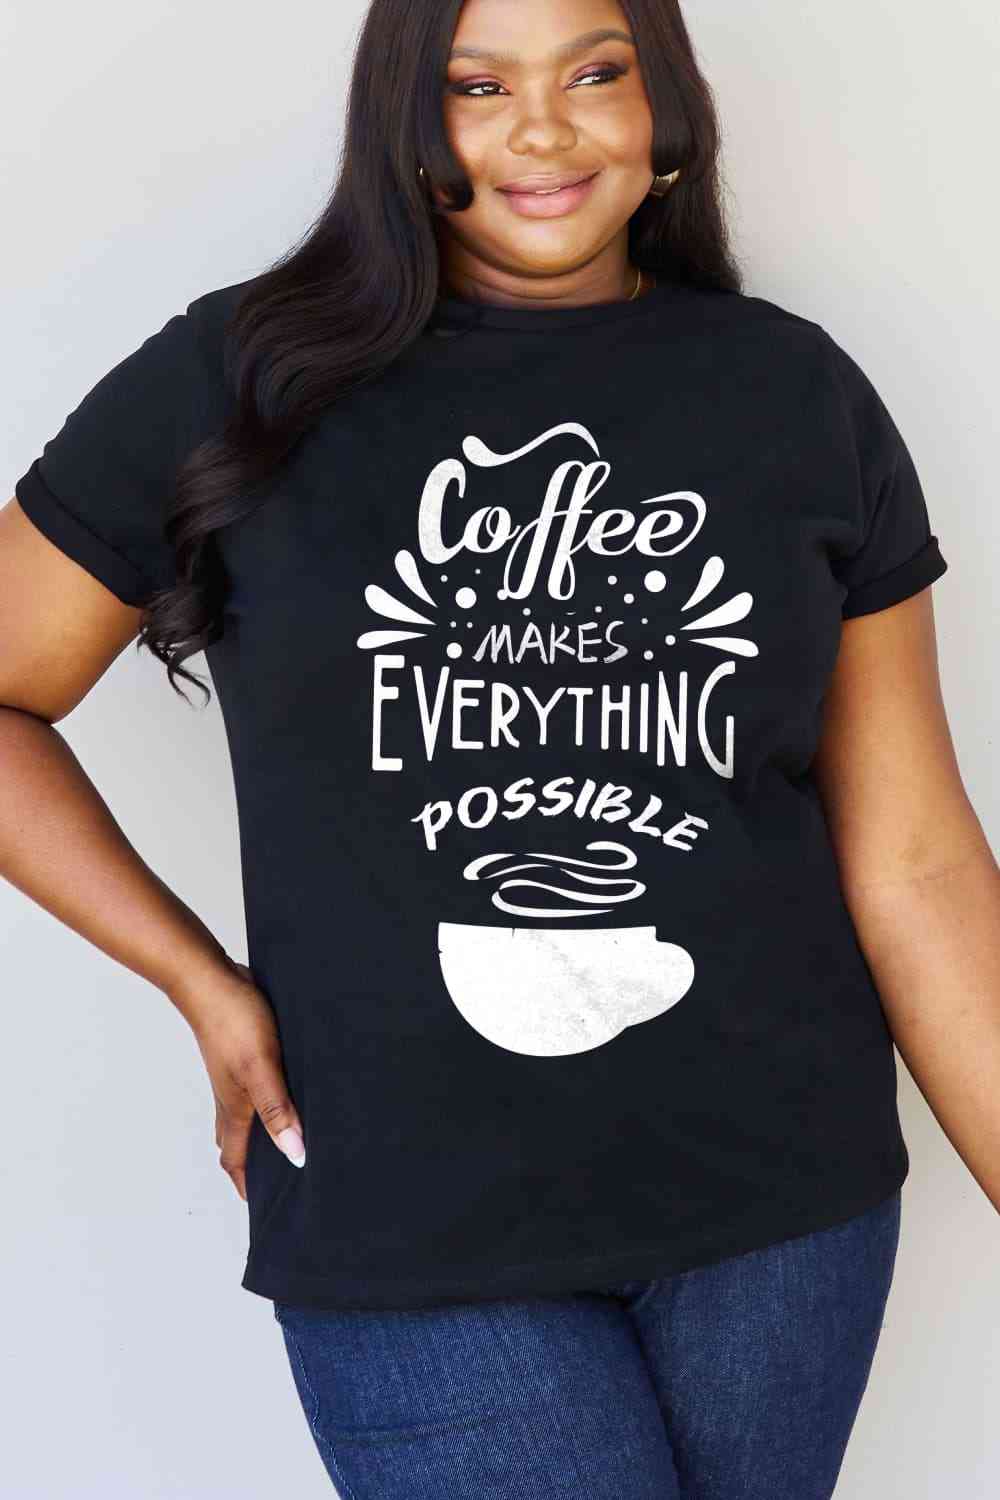 COFFEE MAKES EVERYTHING POSSIBLE Graphic Cotton Tee - Black / S - T-Shirts - Shirts & Tops - 8 - 2024